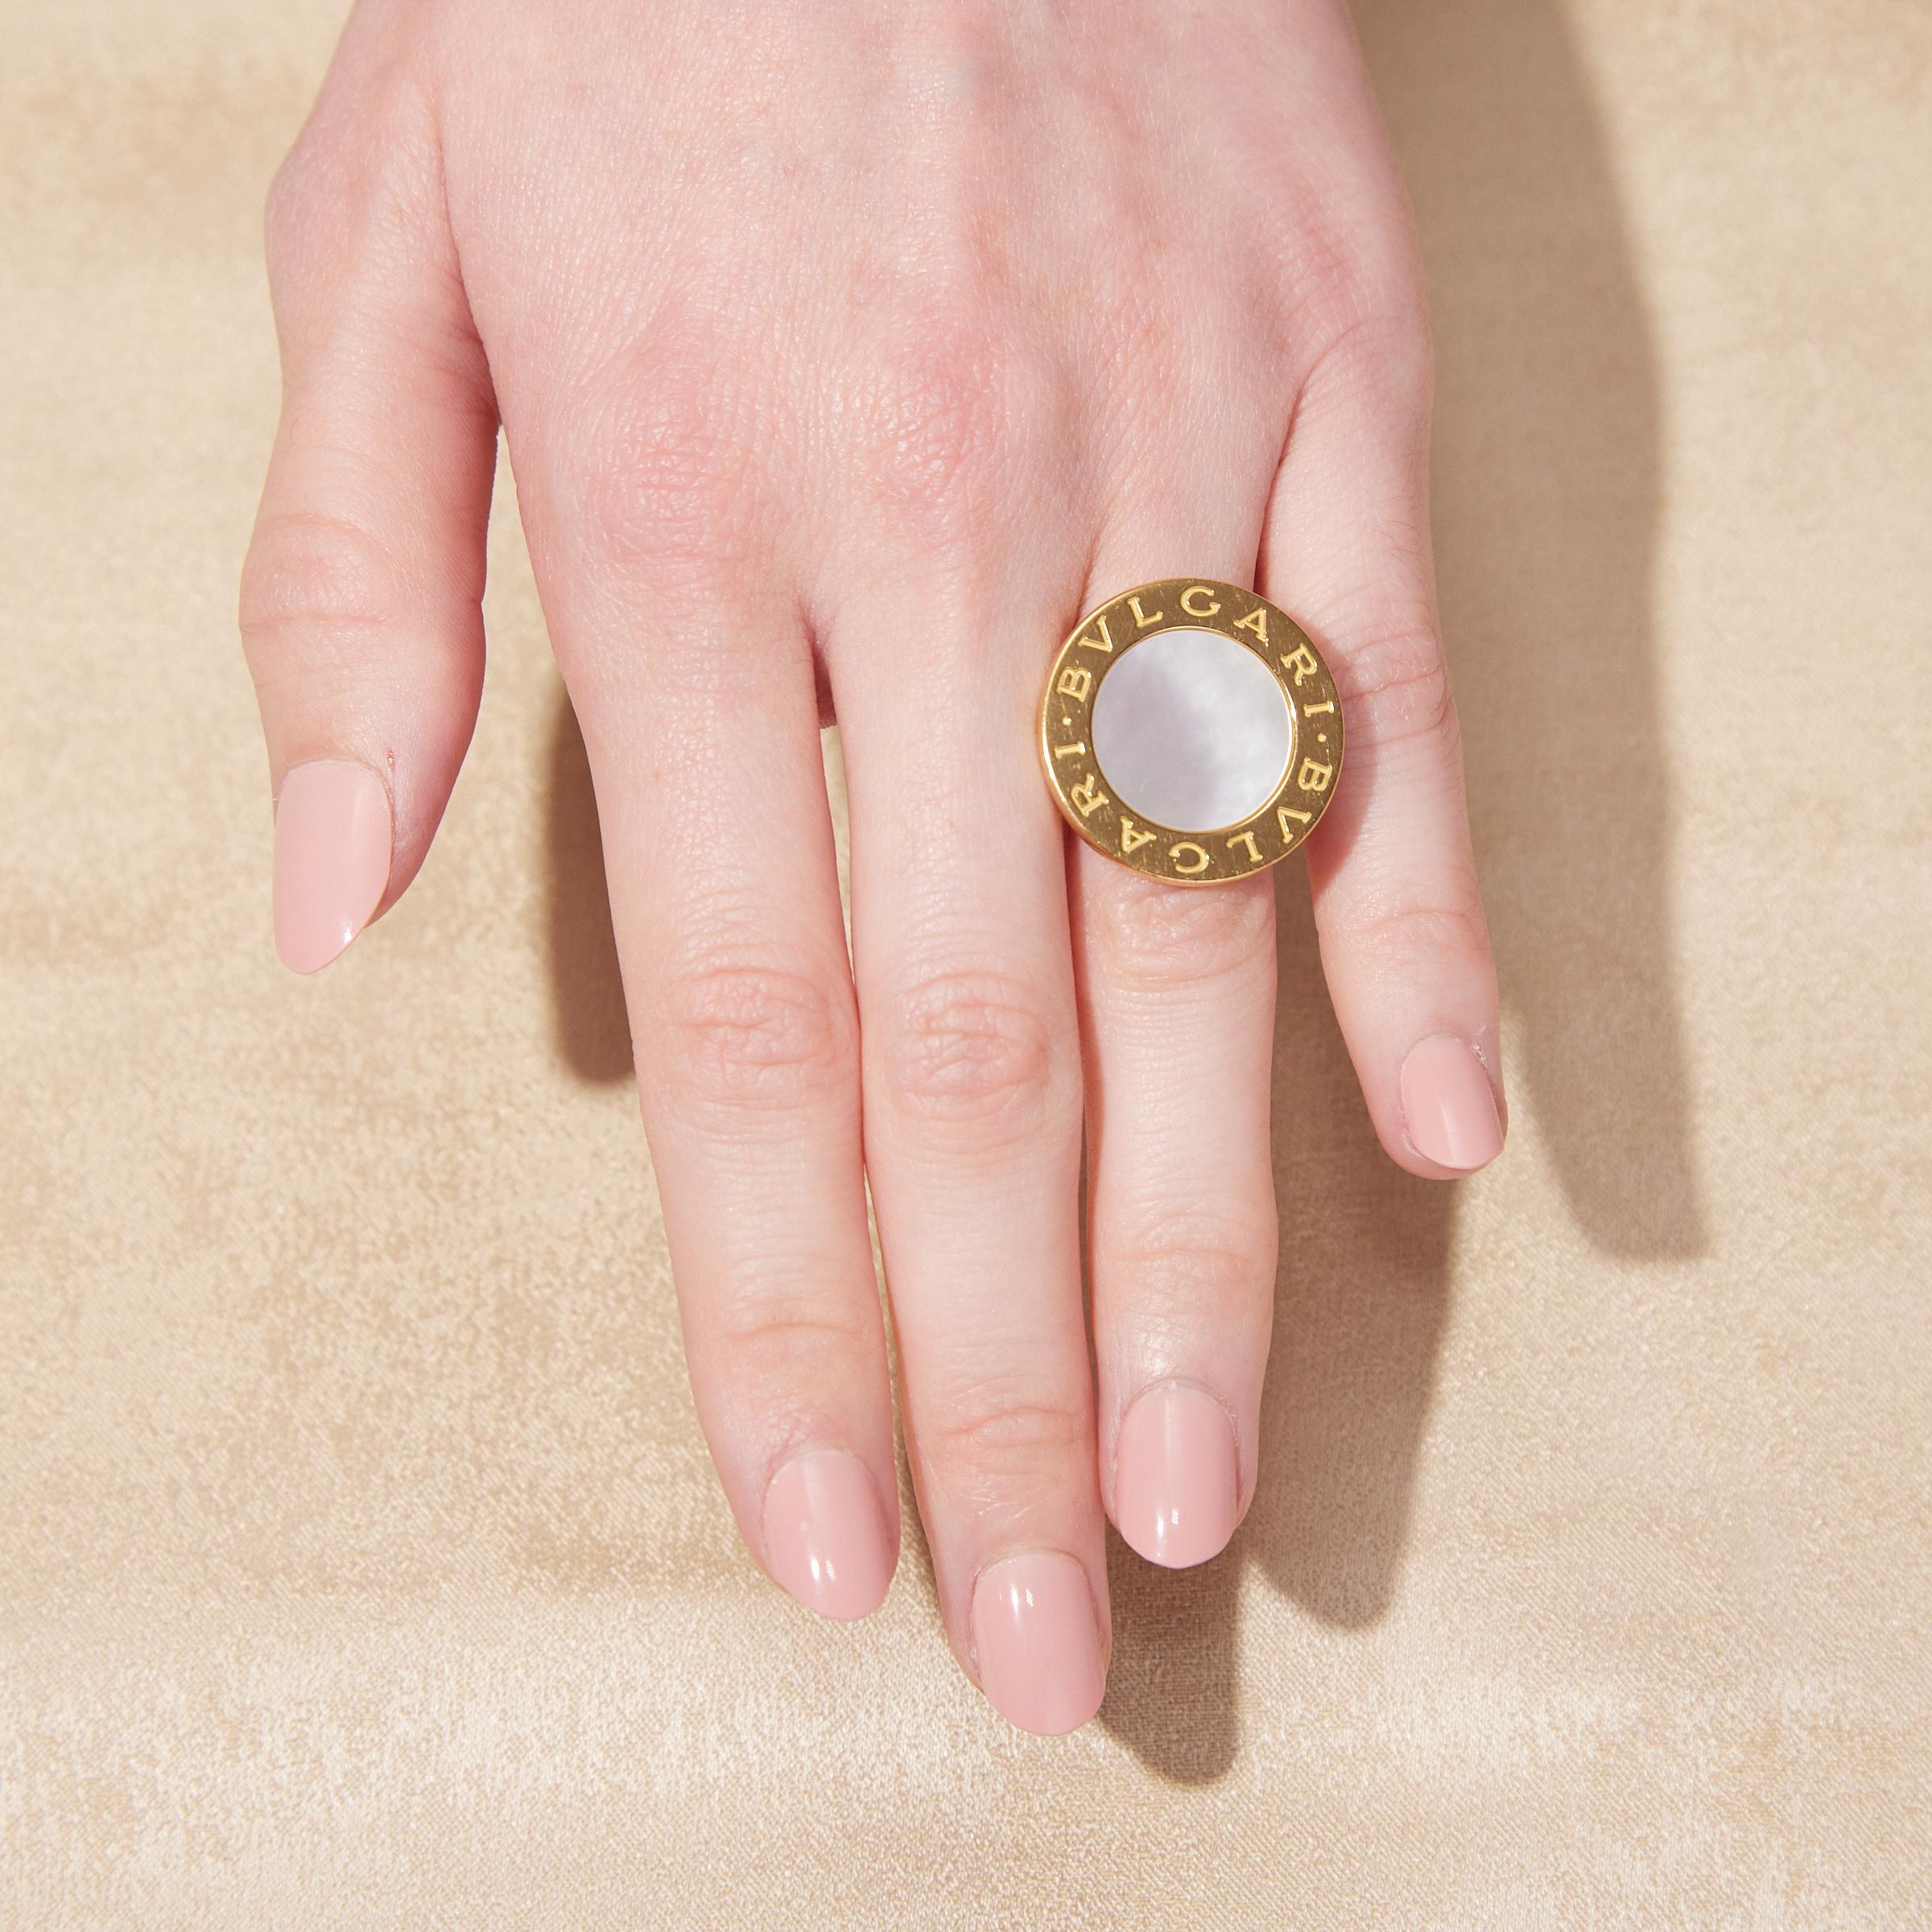 Bulgari 'Bvlgari Bvlgari' Mother of Pearl Large Version Ring in 18K Yellow Gold In Excellent Condition For Sale In Dallas, TX